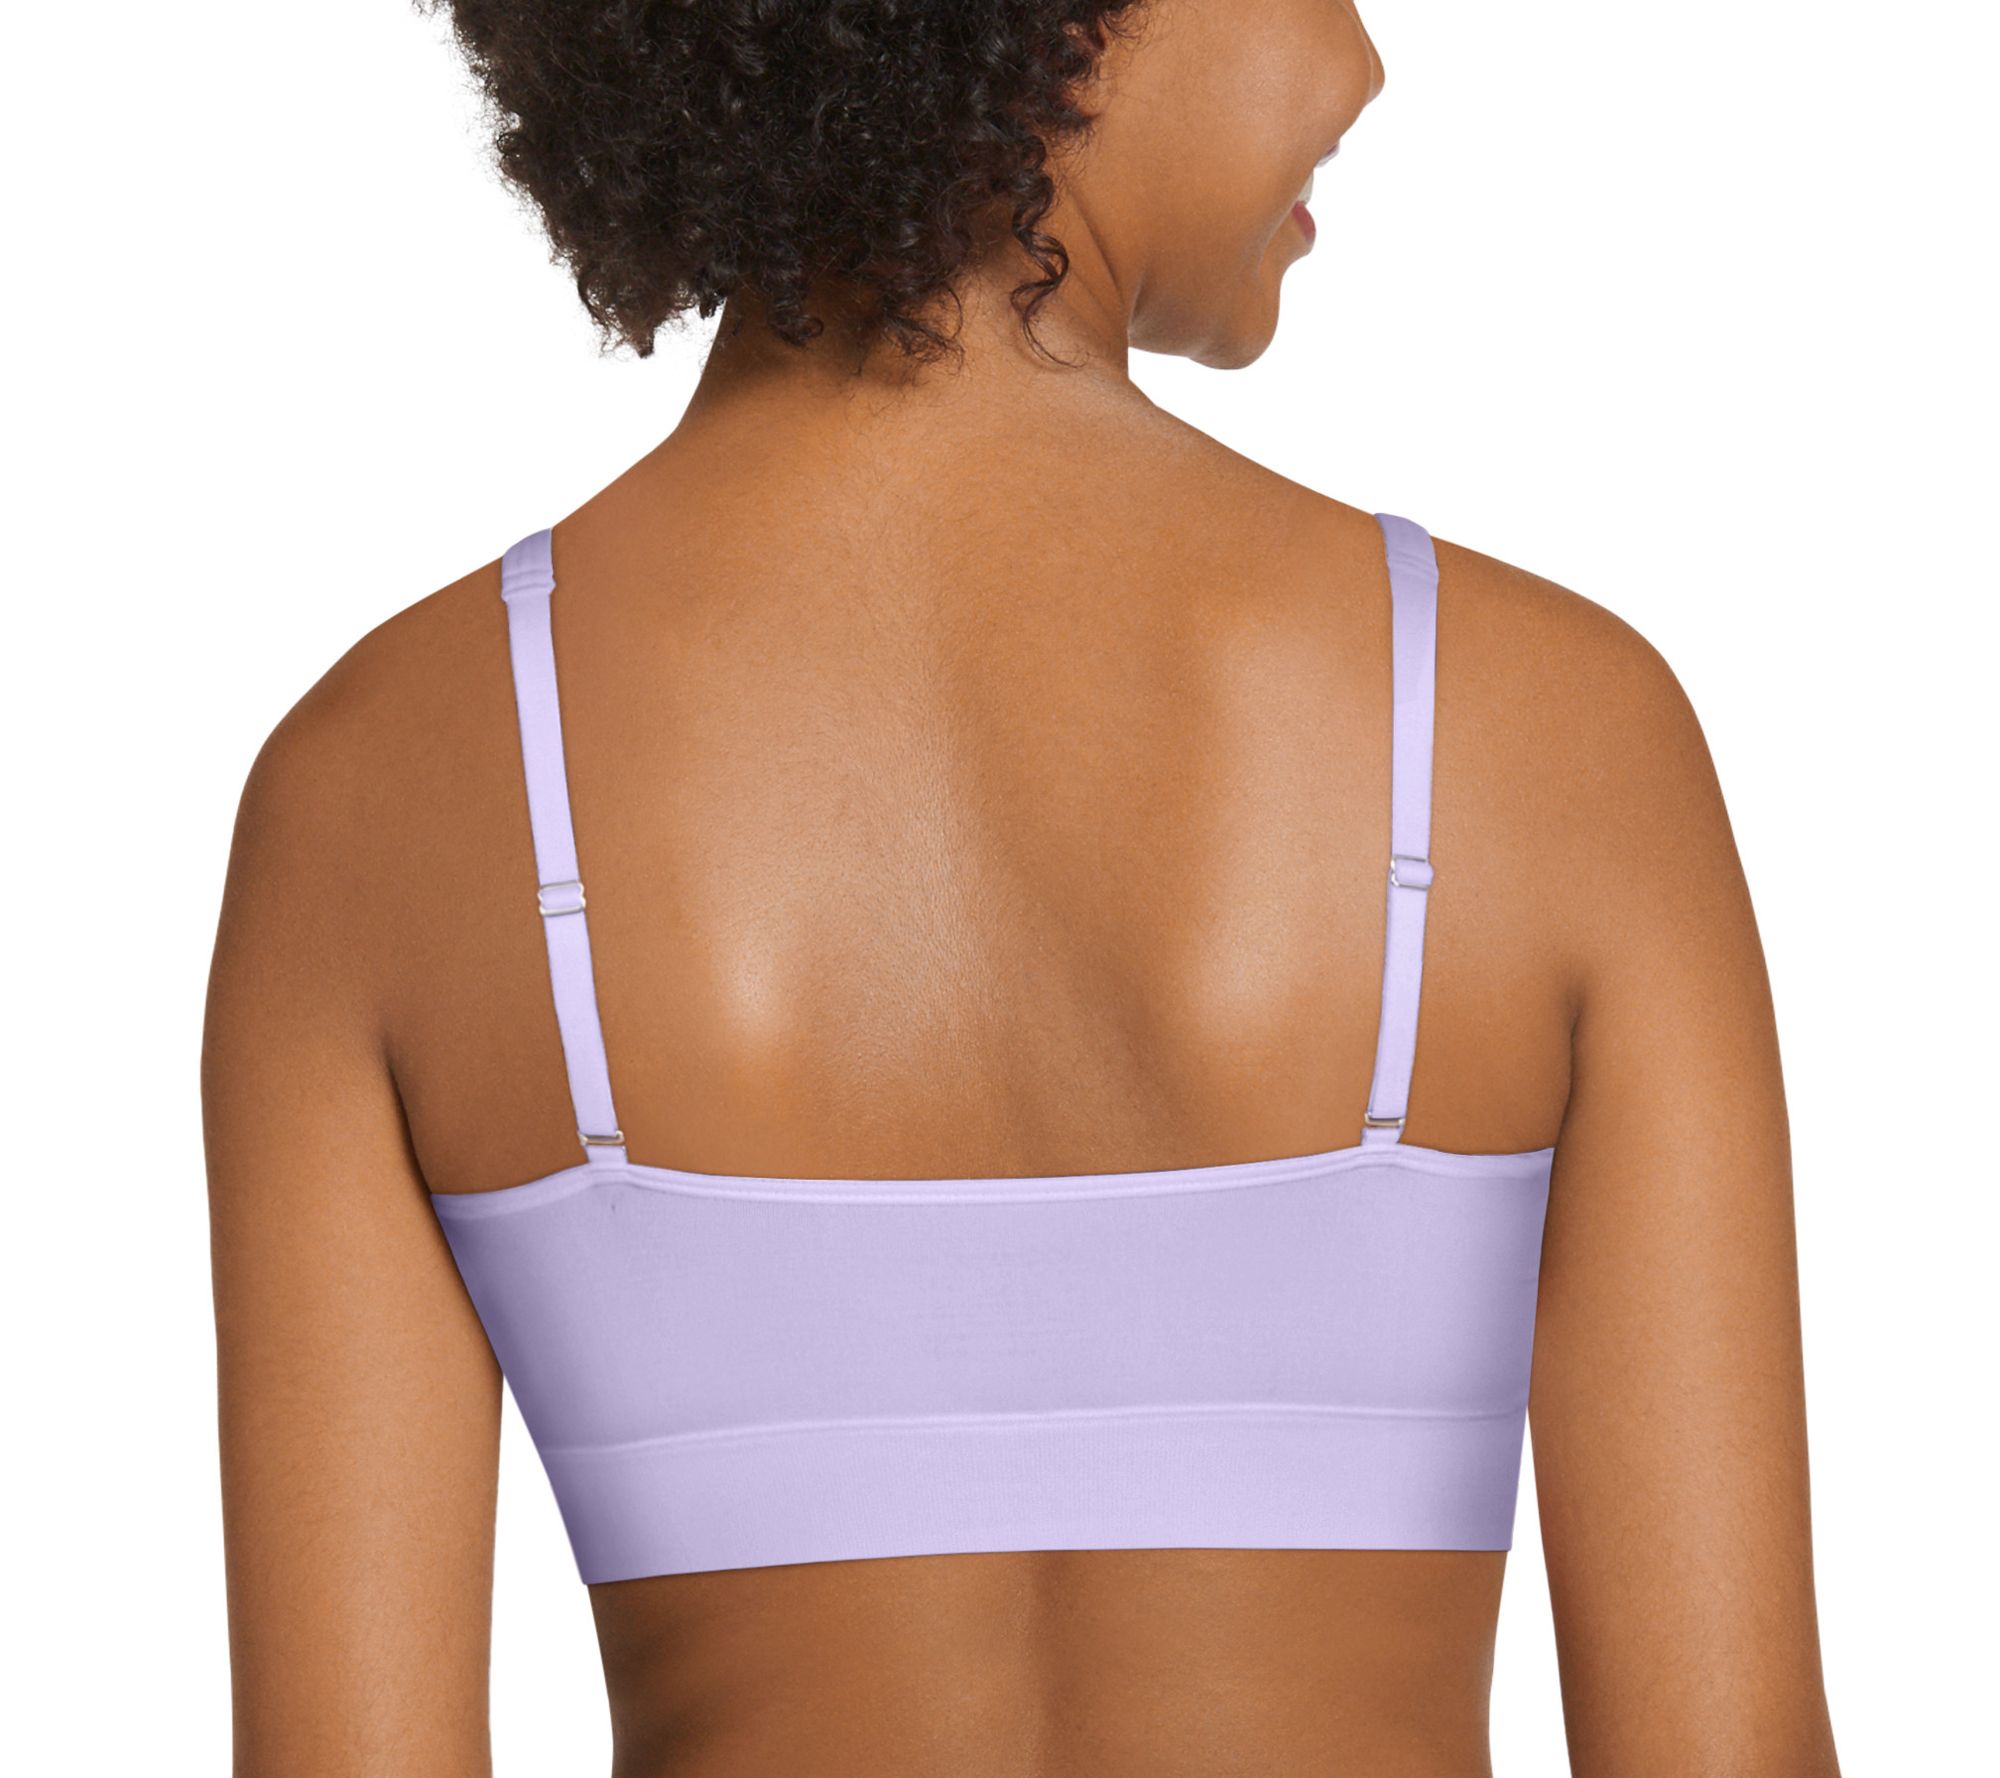 Jockey Seamfree Smooth and Shine Molded-Cup Bralette 021009